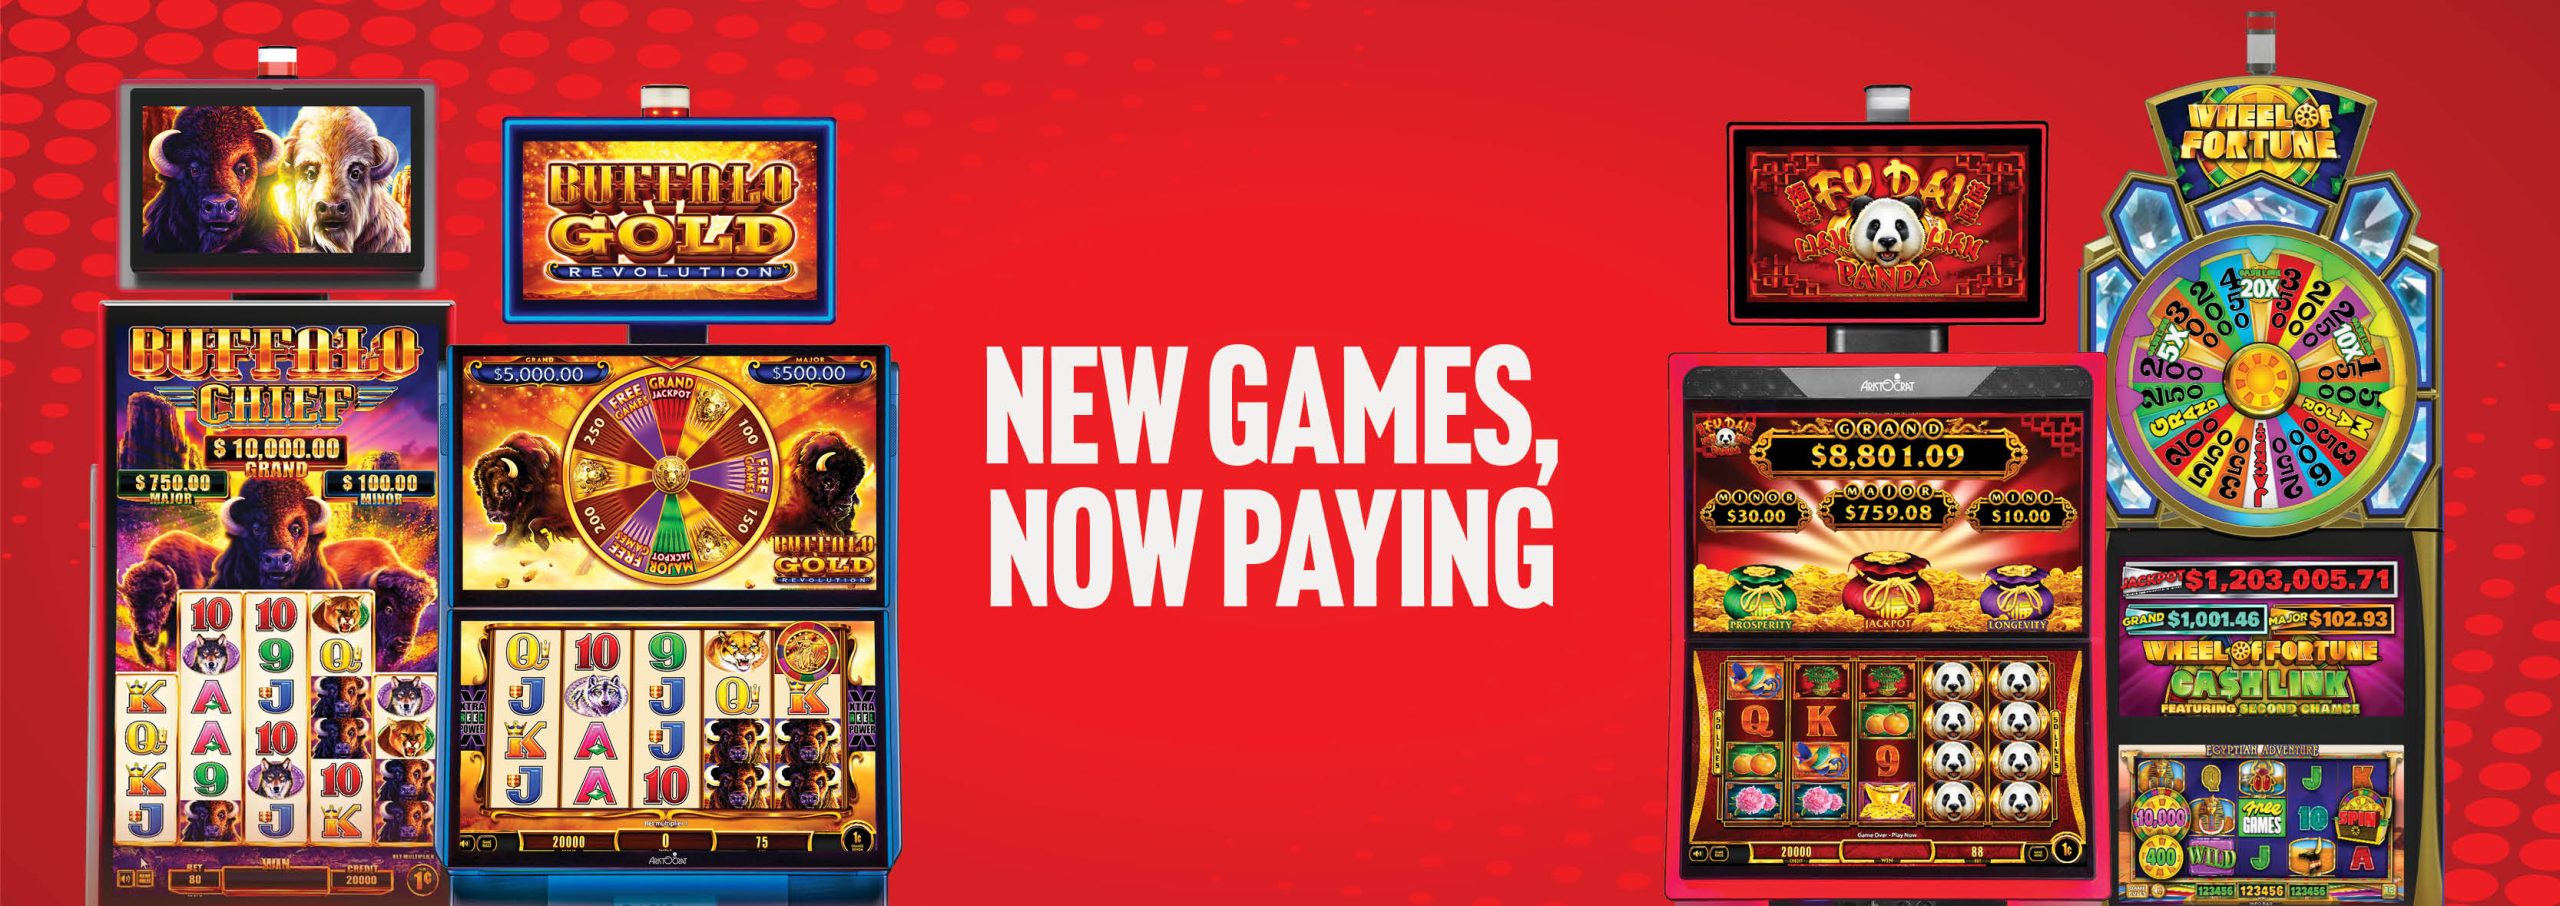 New Games, Now Paying